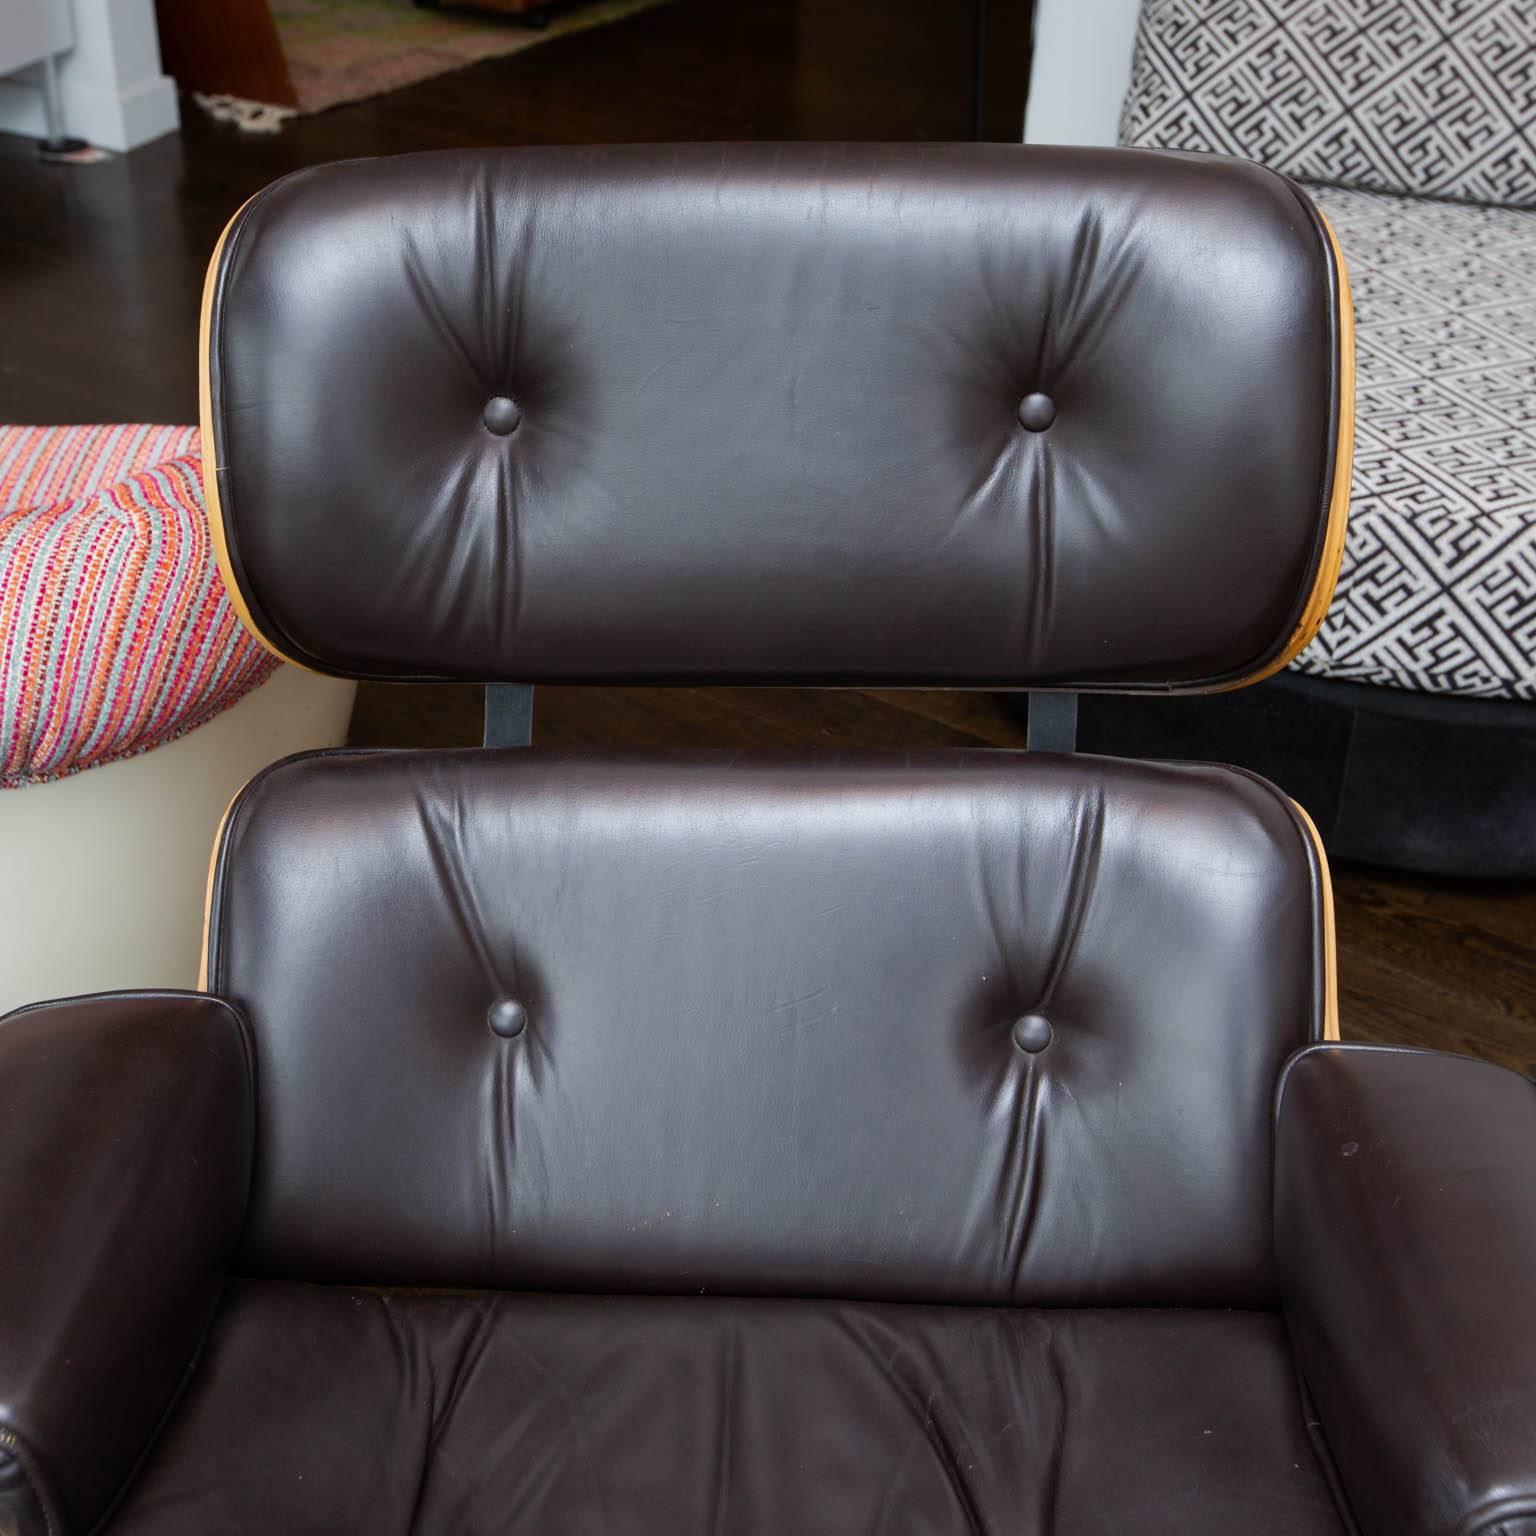 Most likely made by Selig in the 1970s, this good quality replica of the iconic Eames lounge chair and ottoman in chocolate brown leather is of a higher quality than the Plycraft ones of the same era. Has rivets in back's highest section where